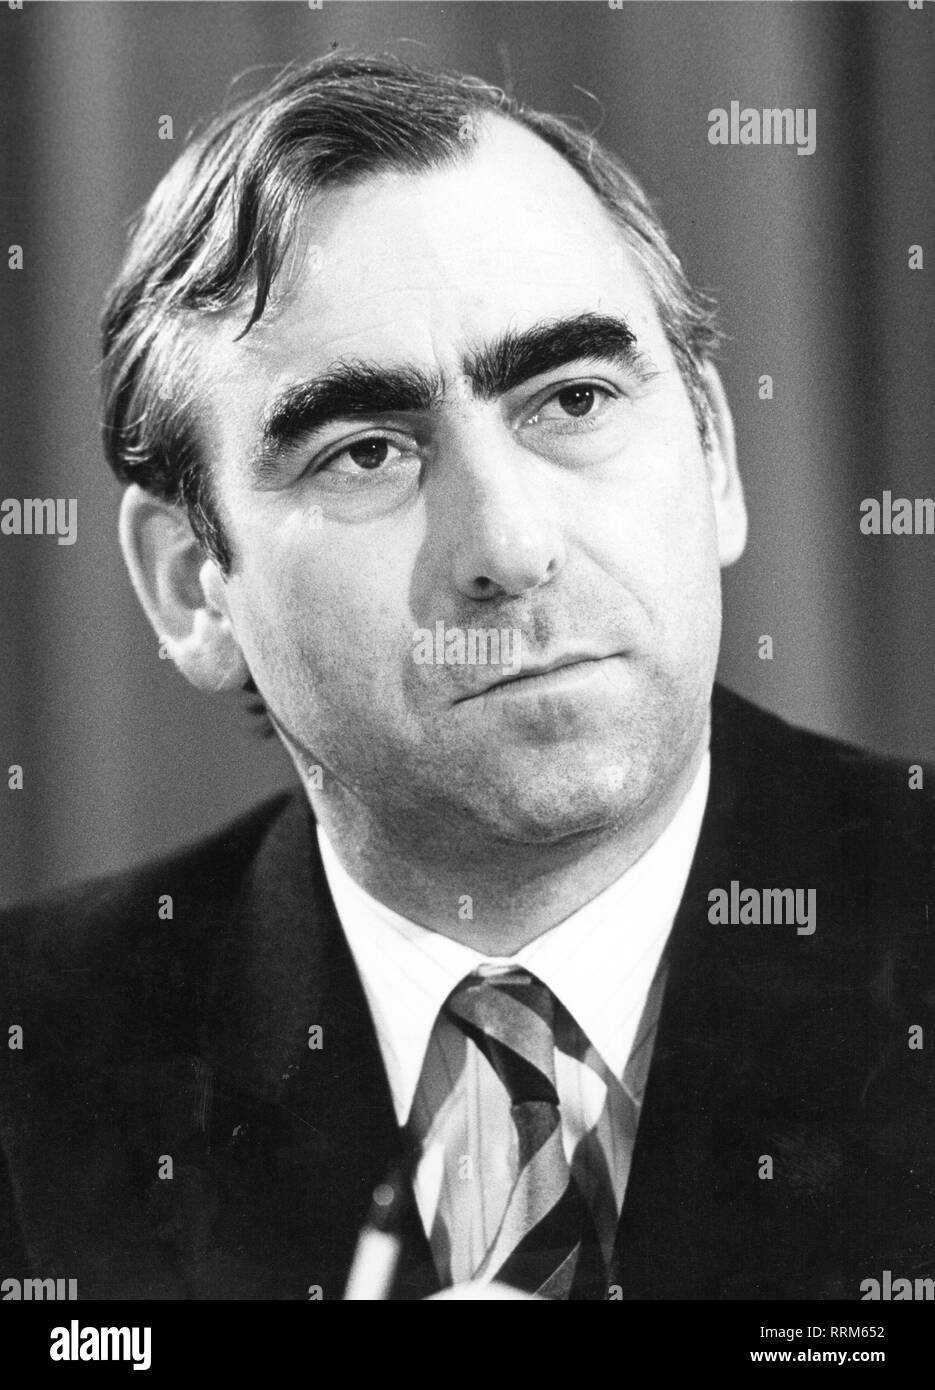 Waigel, Theodor 'Theo', * 22.4.1939, German politician (Christian Social Union), portrait, 1985, Additional-Rights-Clearance-Info-Not-Available Stock Photo